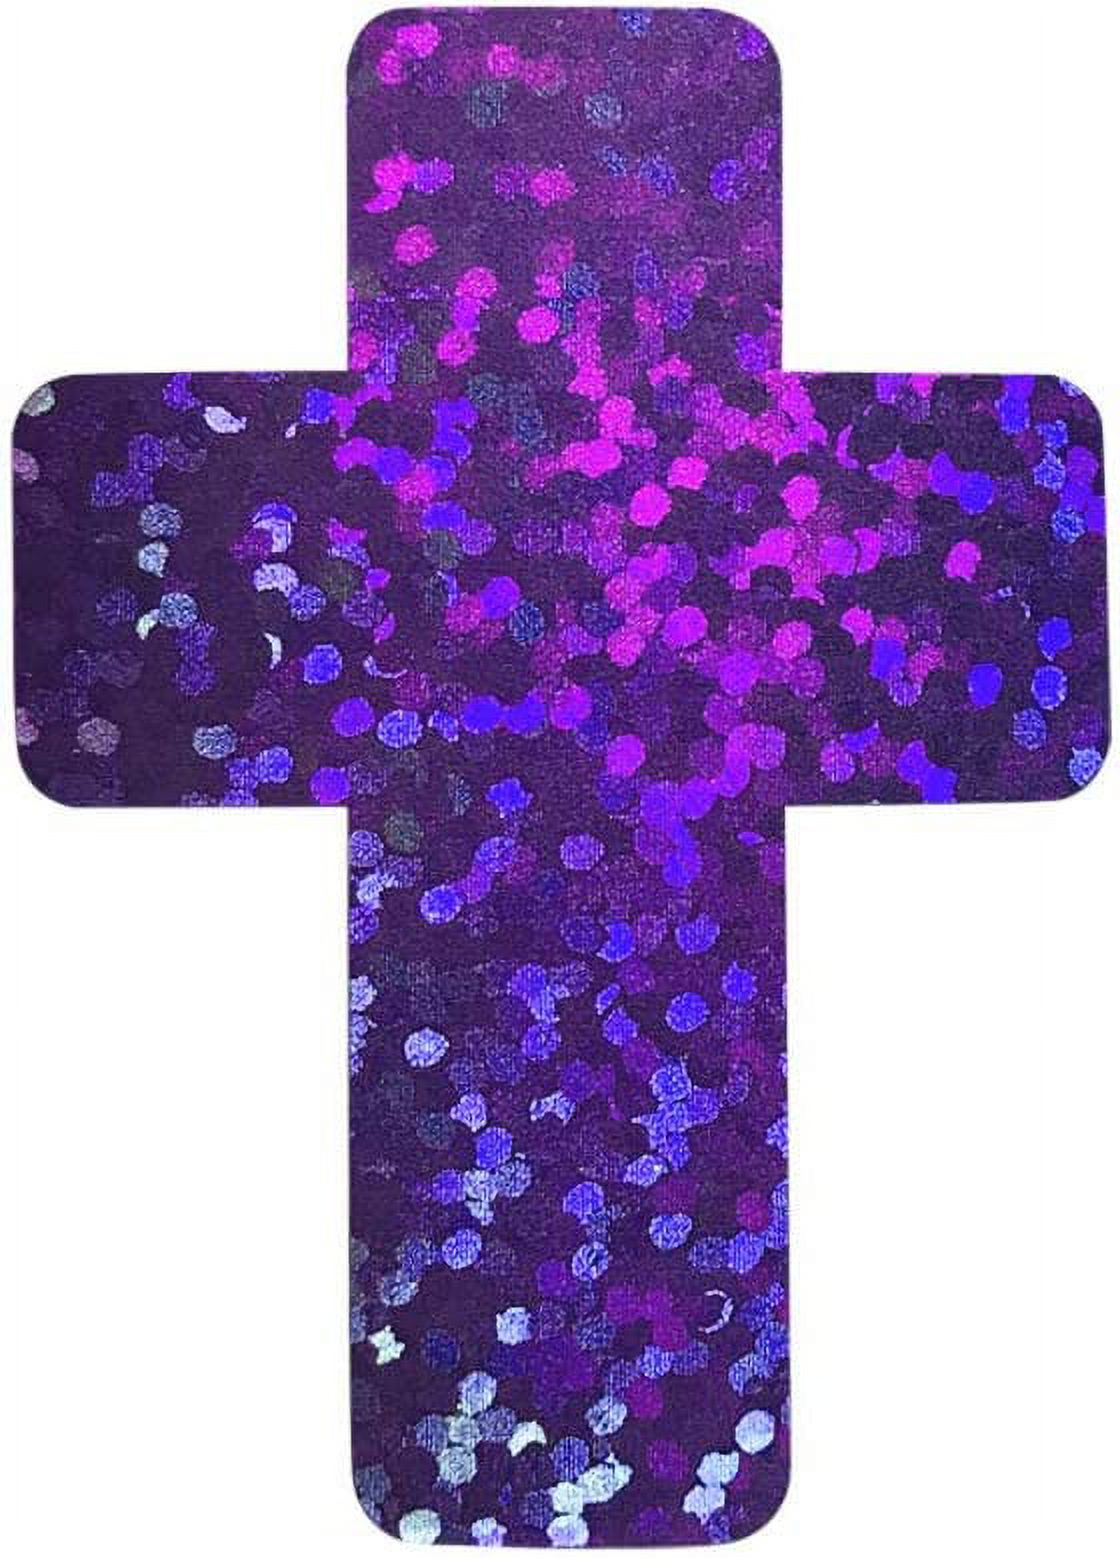 Kipp Brothers Roll of 100 Sparkle Cross Stickers for Vbs, Sunday School